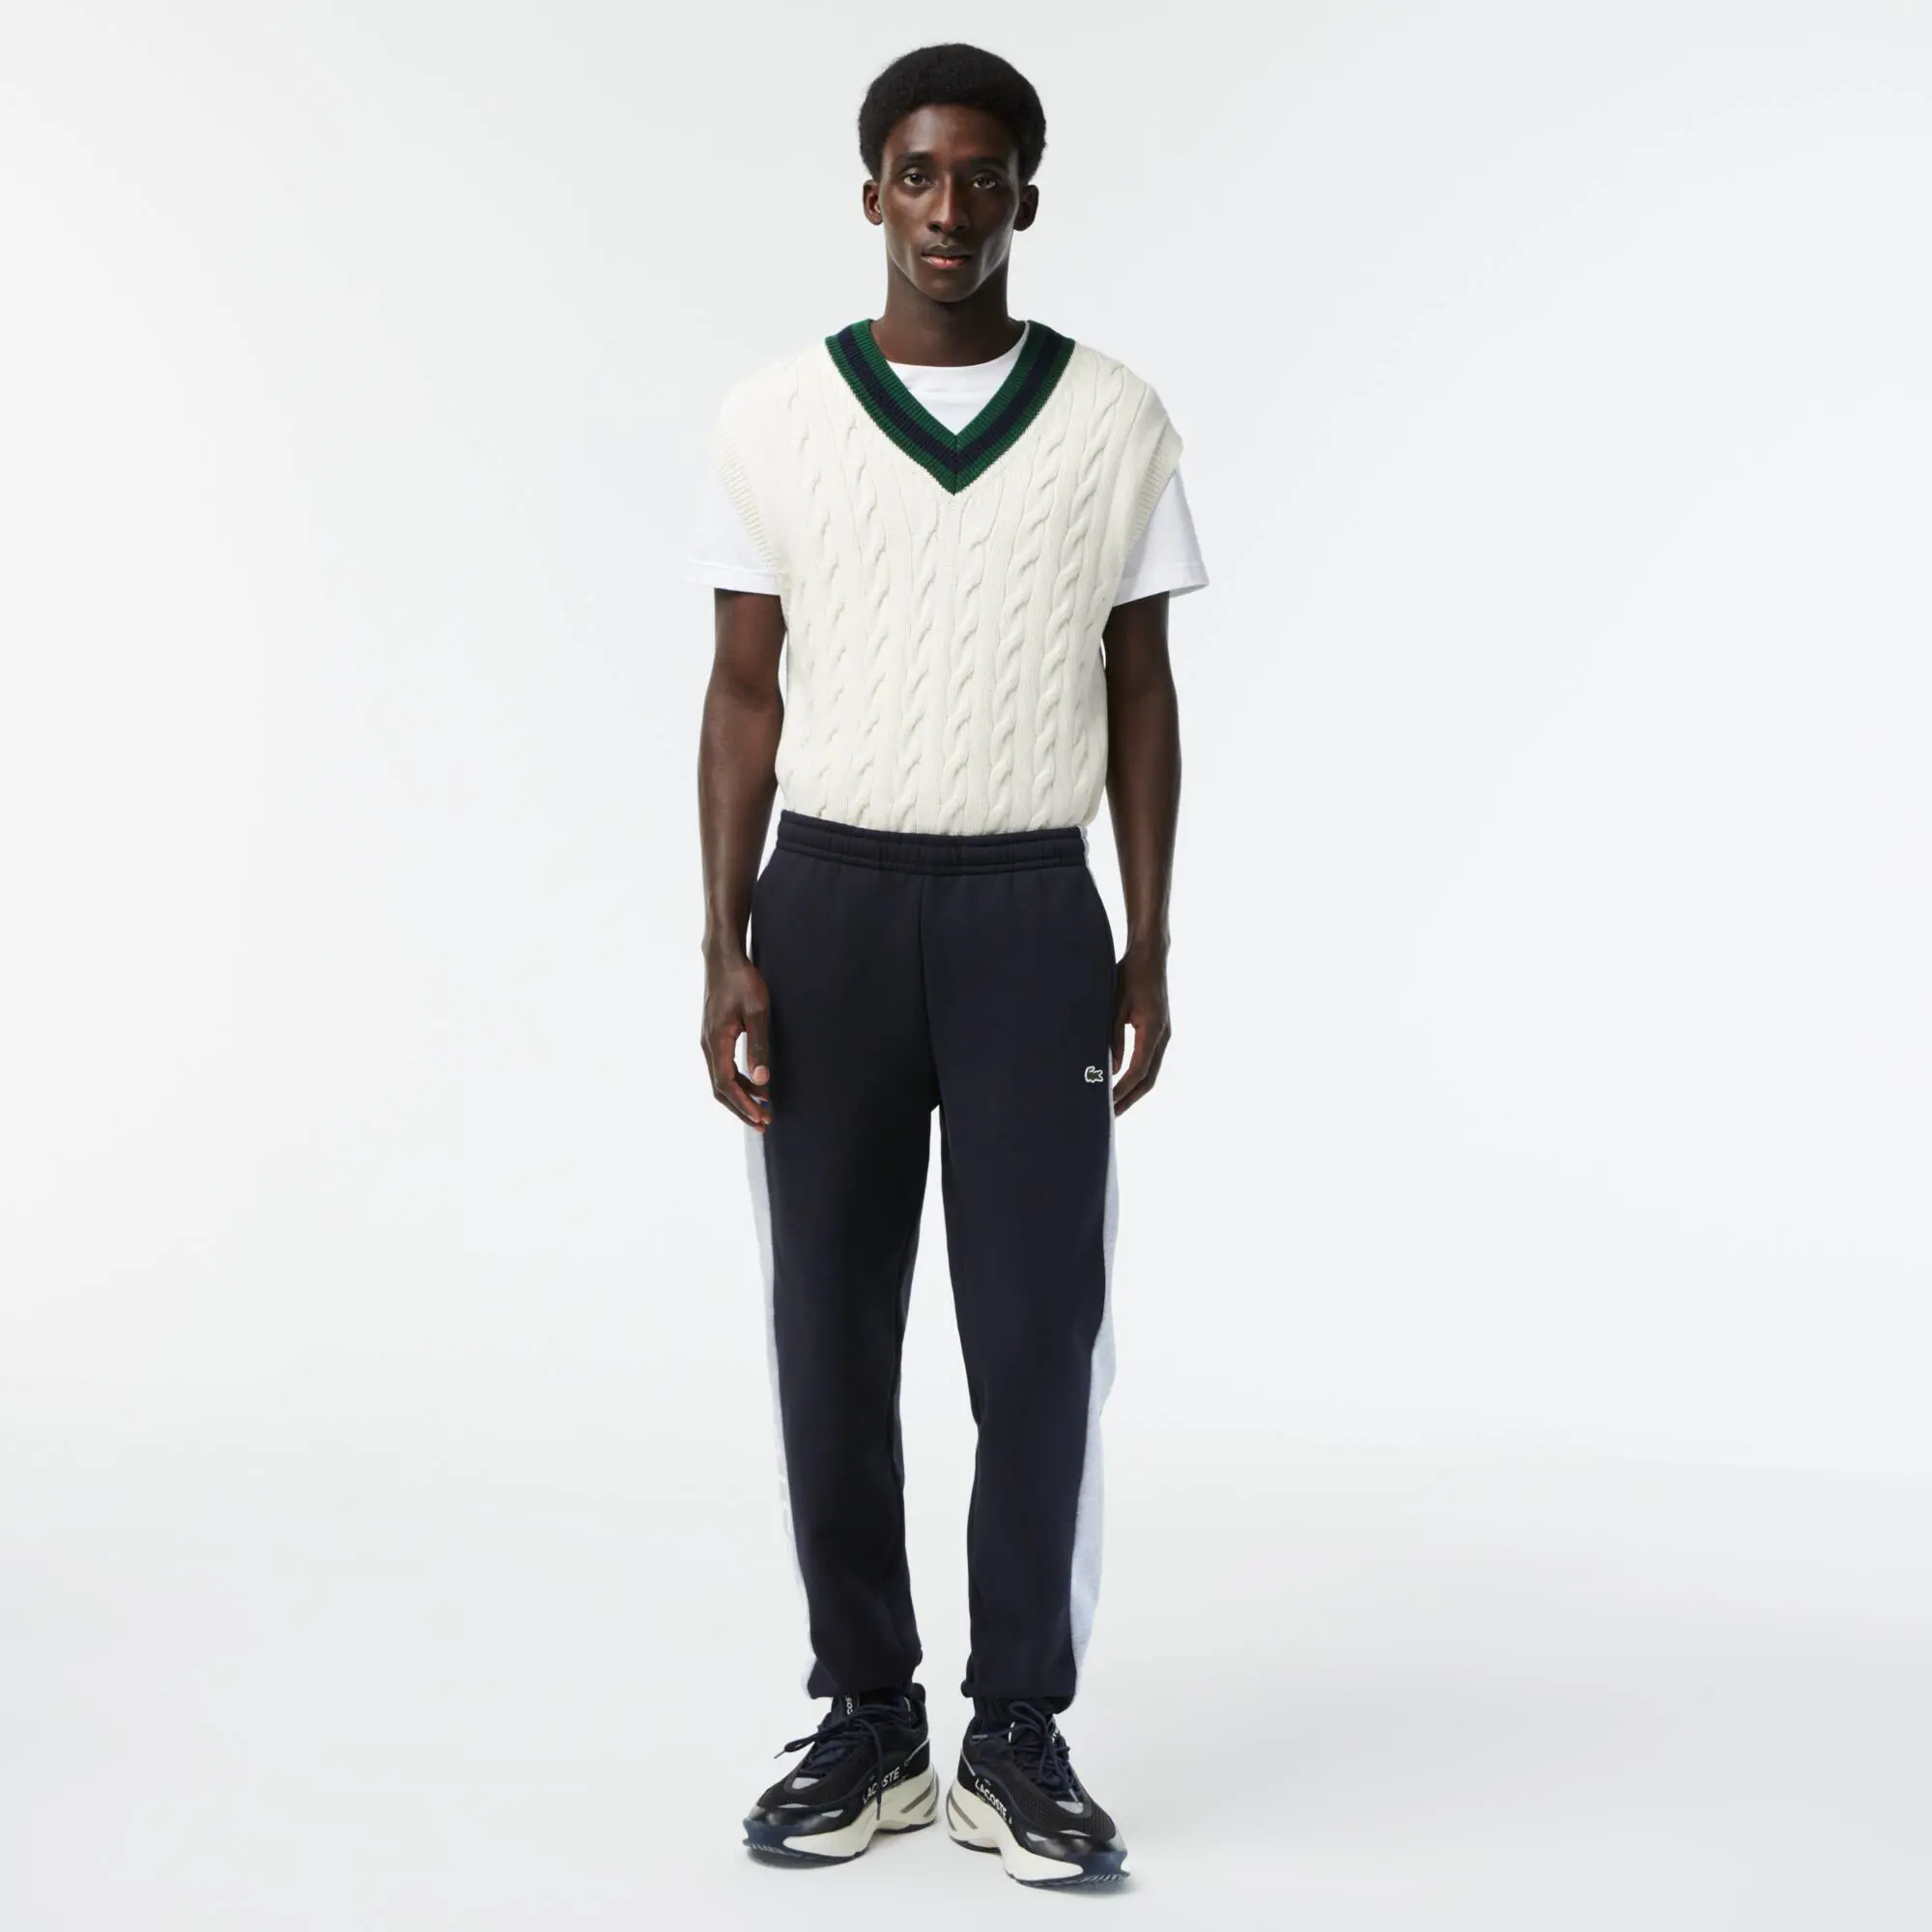 Lacoste Men’s Track Pants with Branding and Contrast Stripe Detail. 1